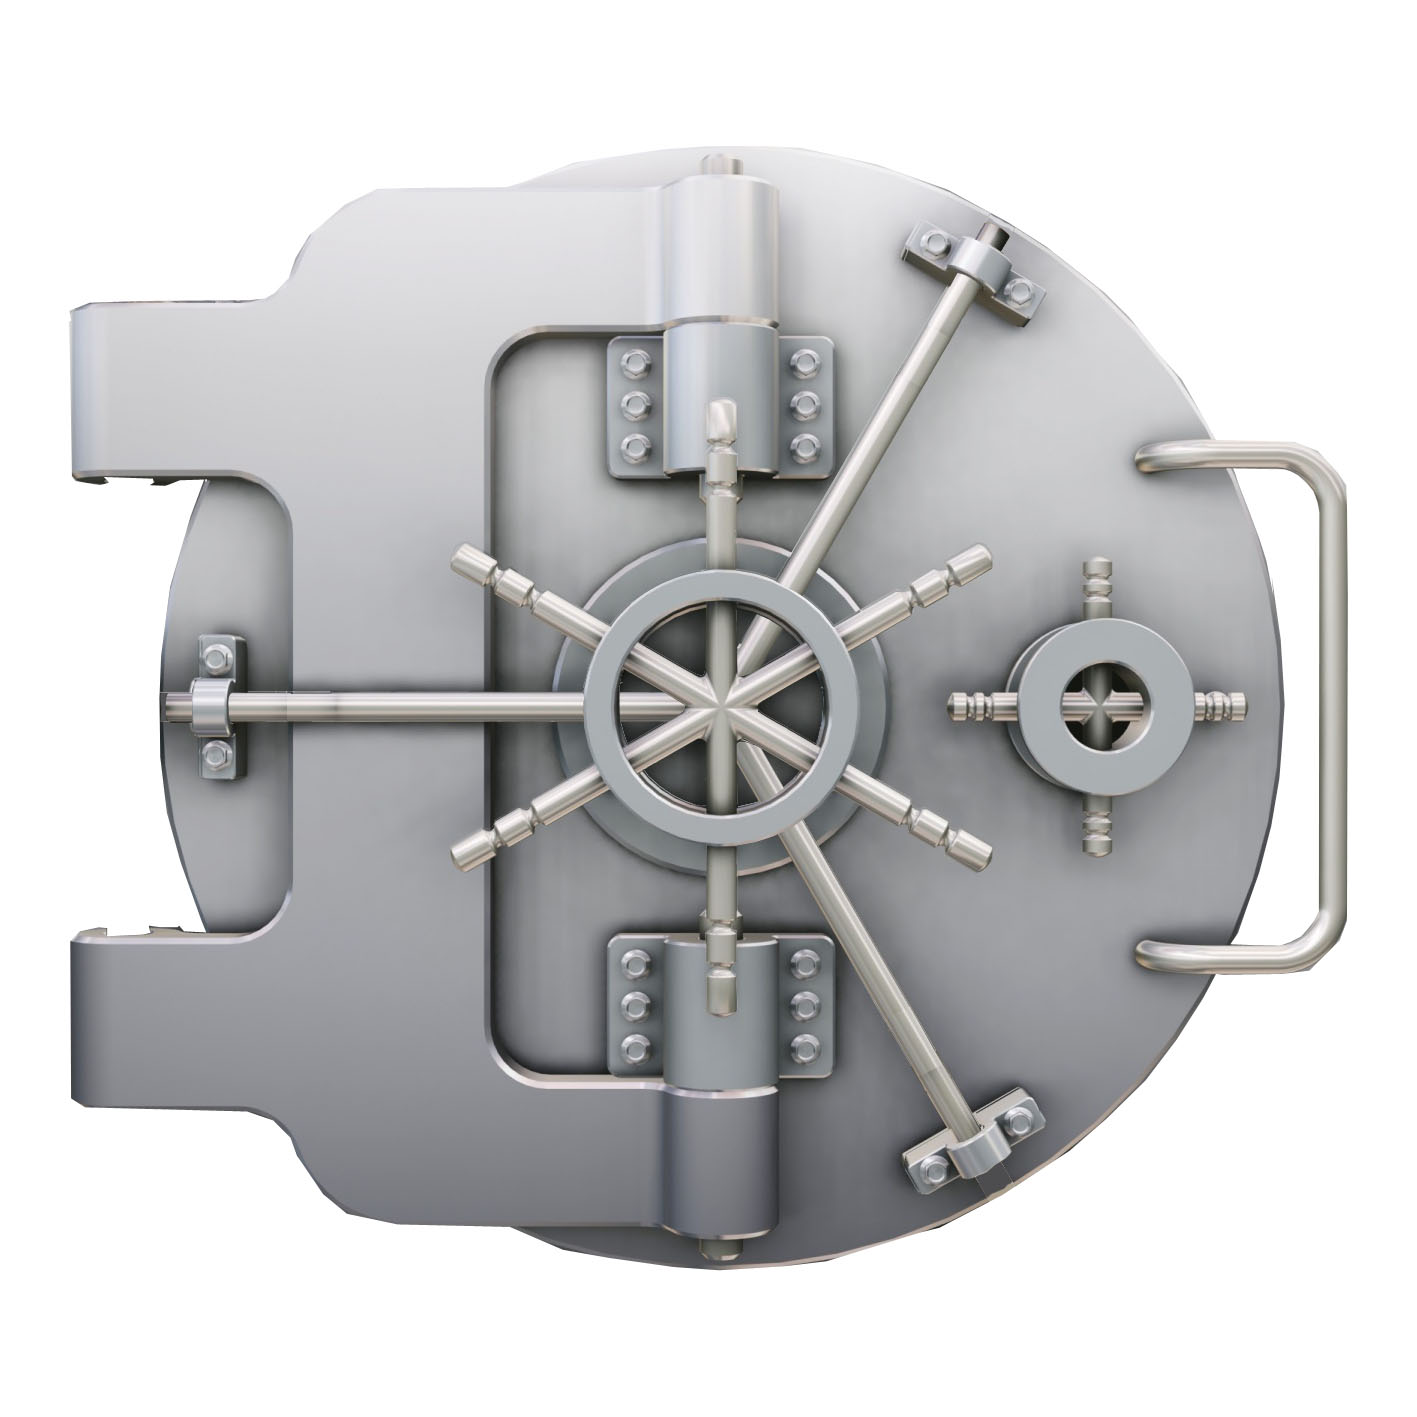 bank security clipart - photo #16